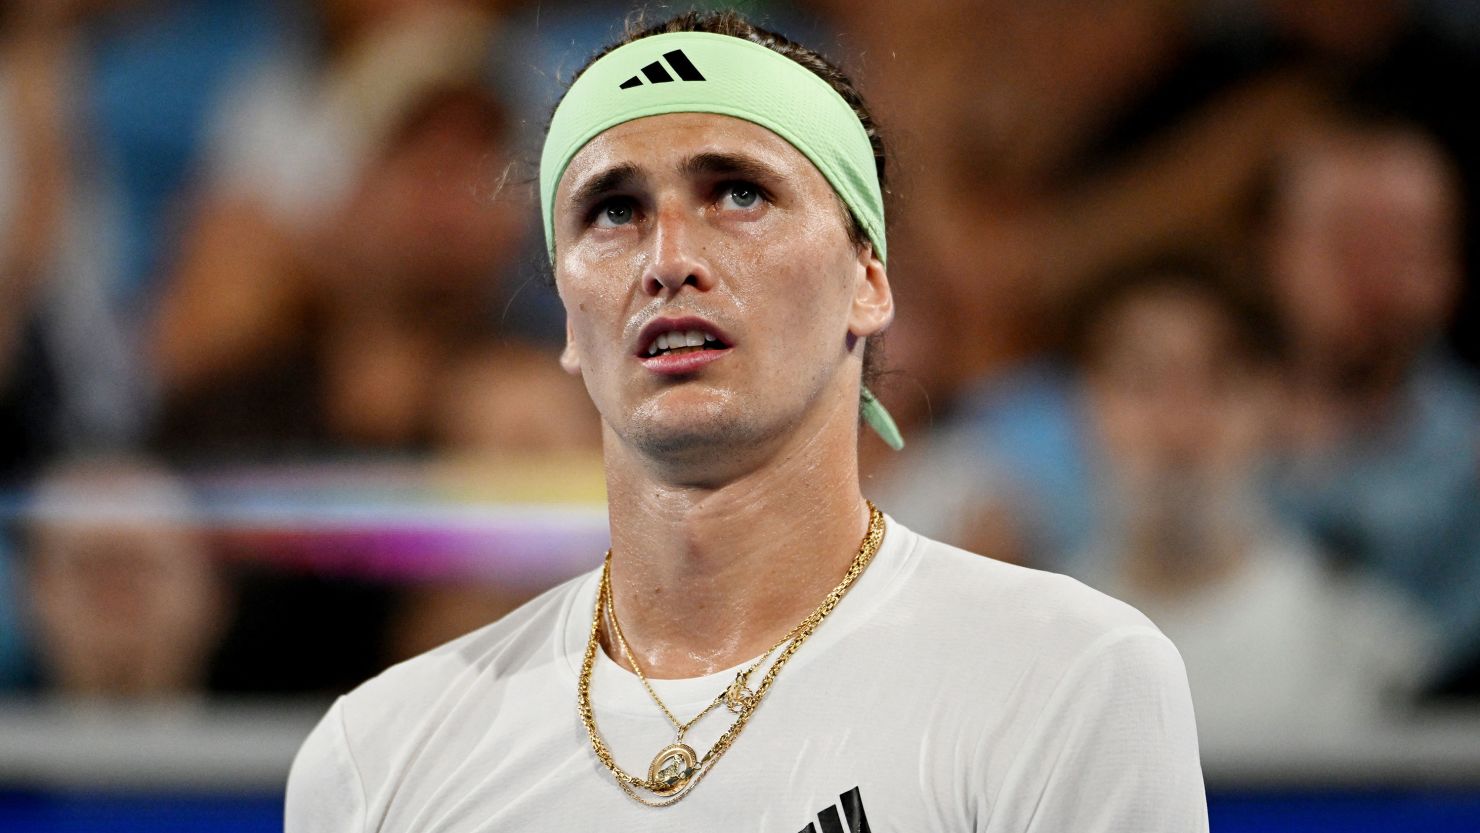 Alexander Zverev: Tennis player to face trial over physical abuse